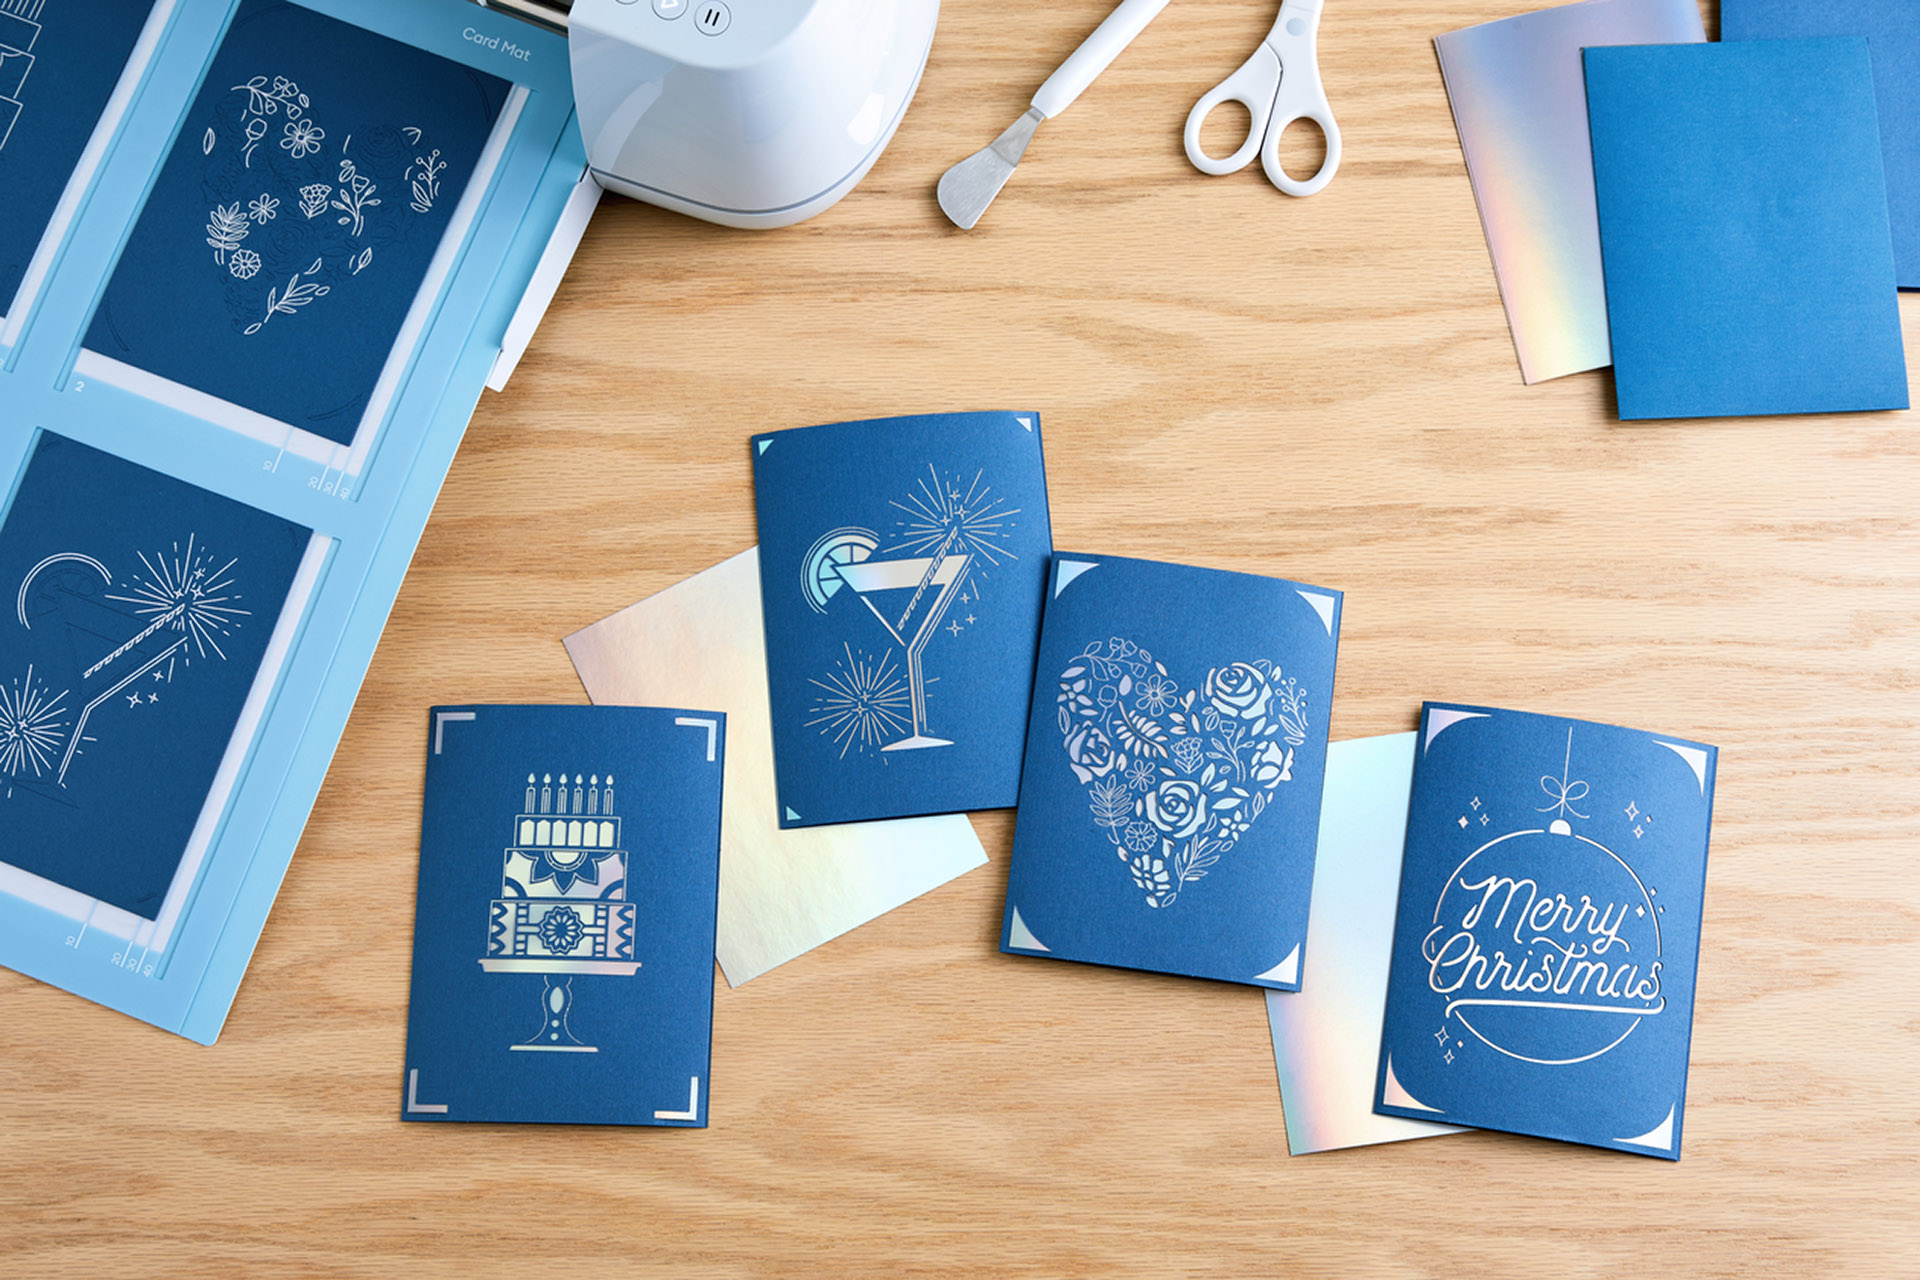 Make cards in minutes with Cricut – Cricut